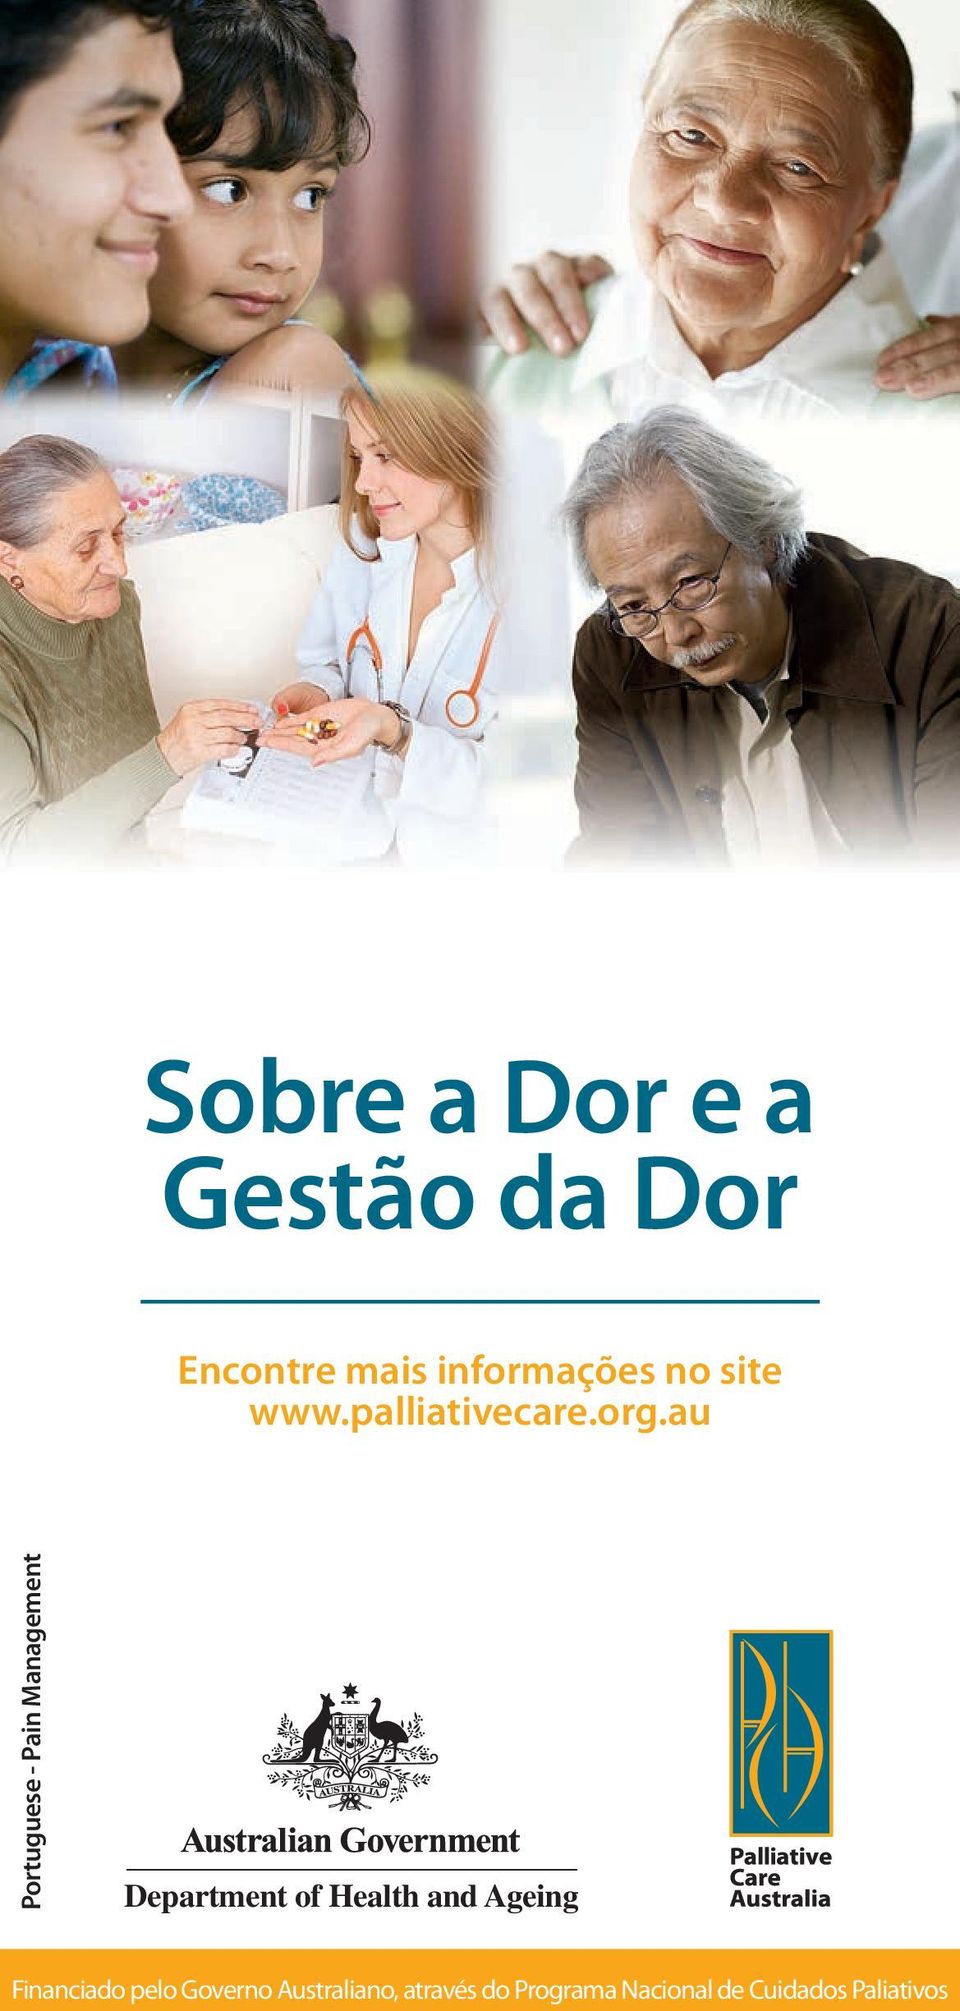 au Portuguese - Pain Management Department of Health and